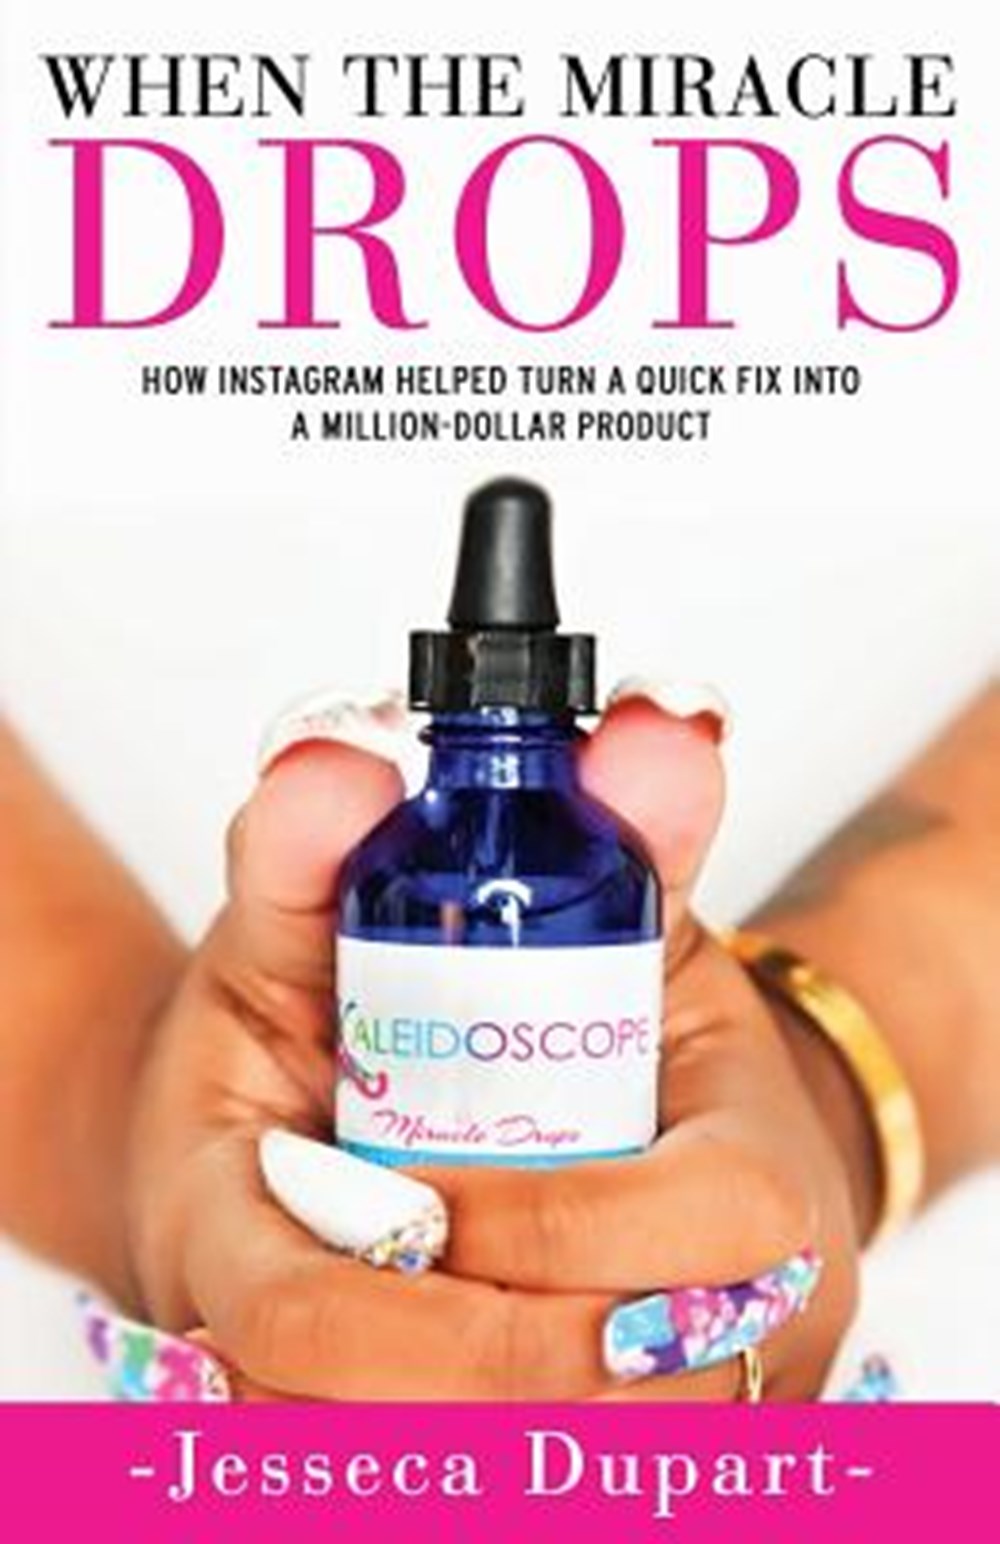 When The Miracle Drops How Instagram Helped Turn A Quick Fix Into A Million-Dollar Product